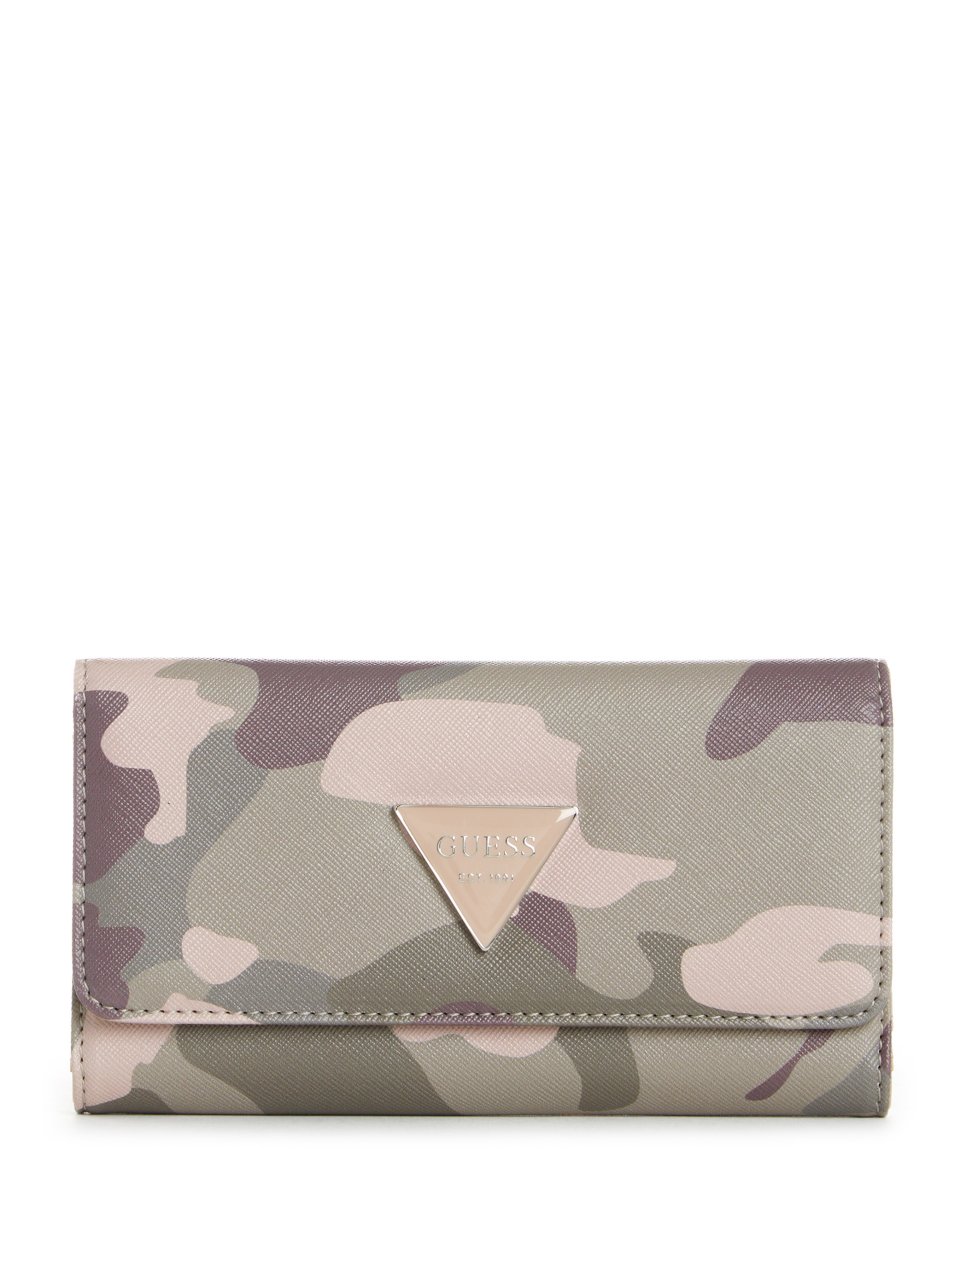 GUESS Factory Women's Abree Floral Wallet